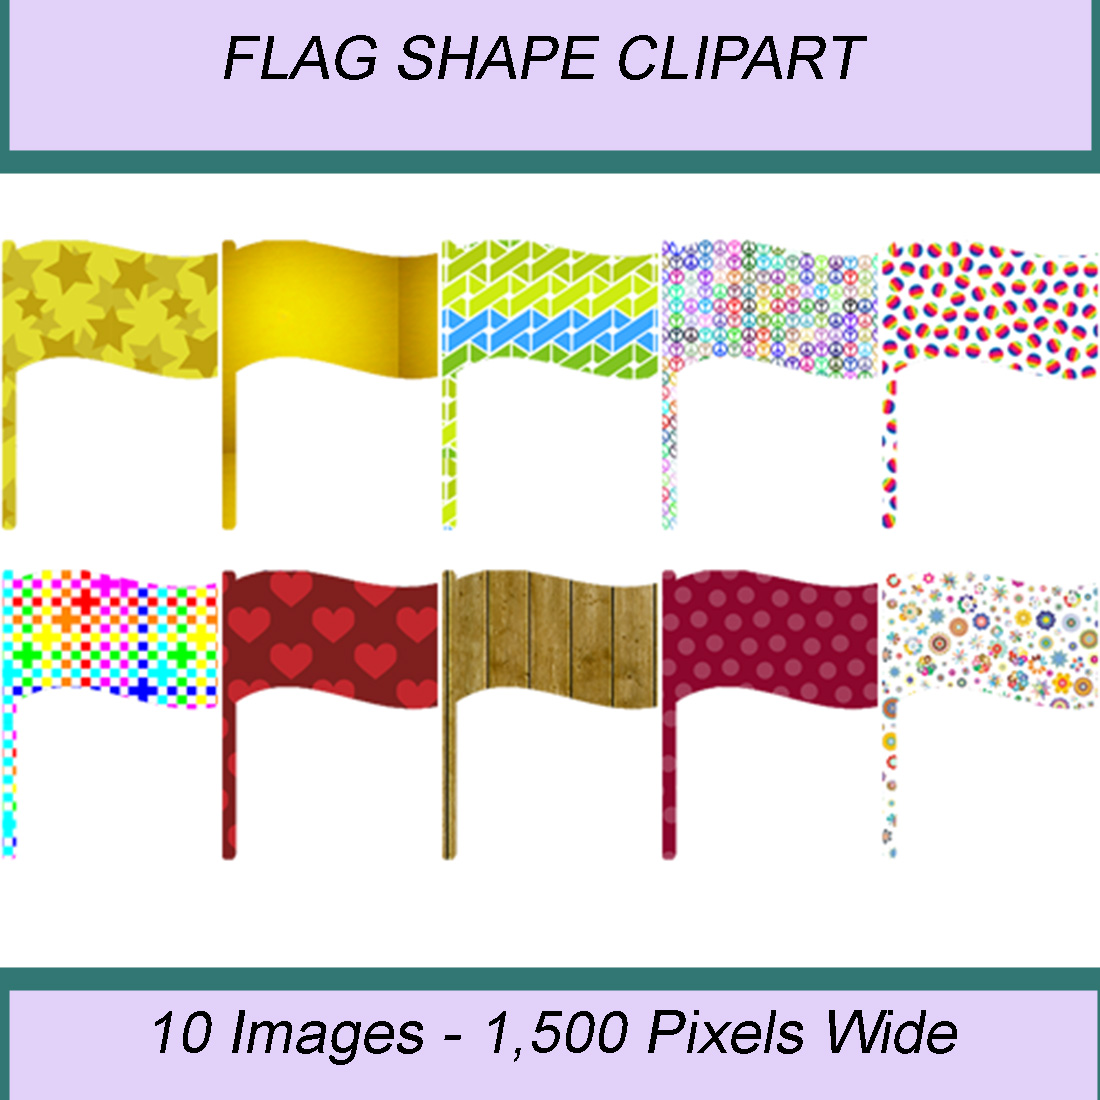 FLAG SHAPE CLIPART ICONS cover image.